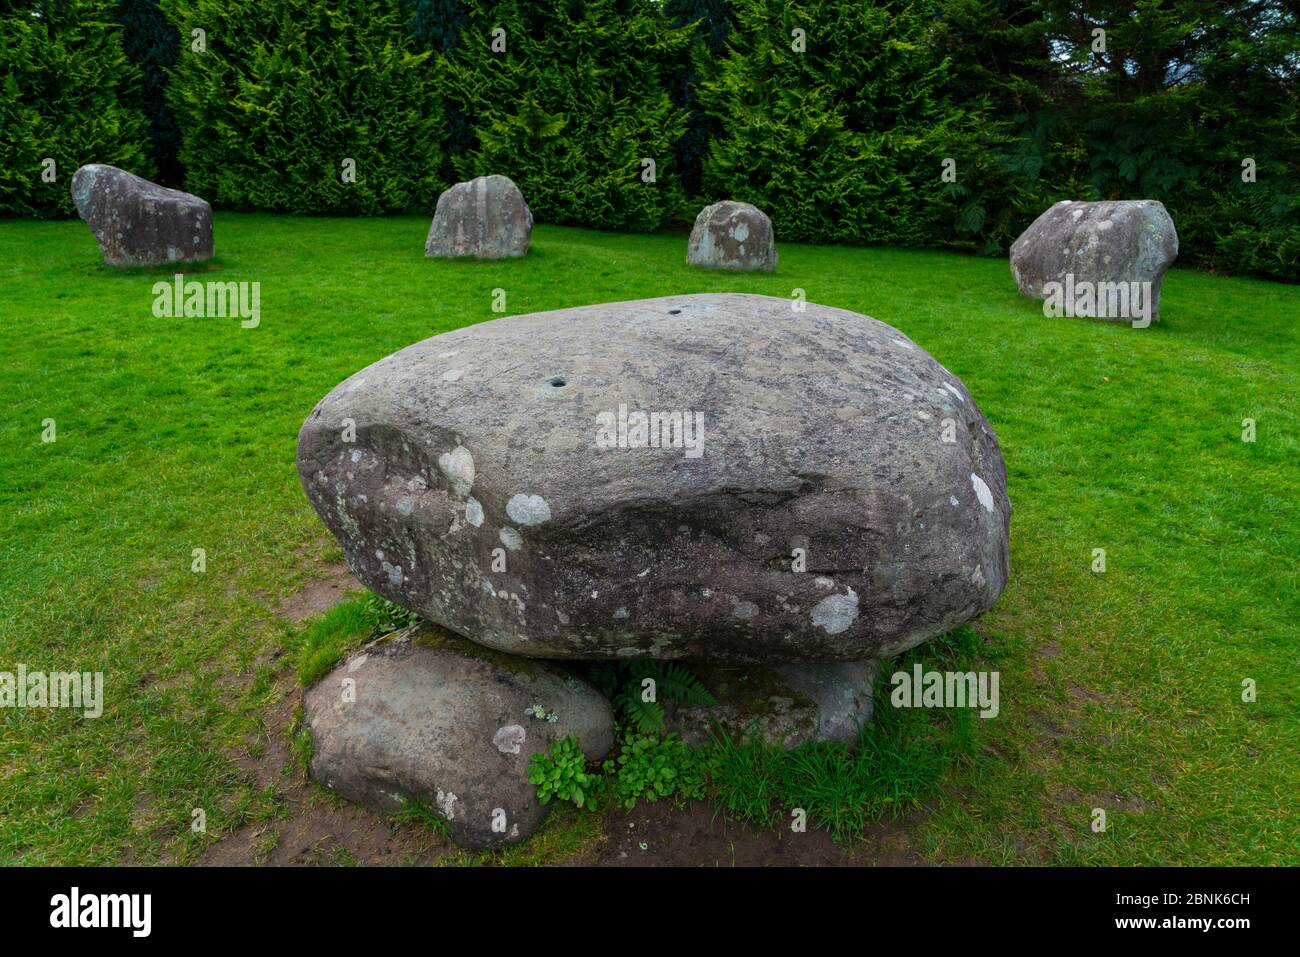 Kenmare Stone Circle, Kenmare, Ring of Kerry, Iveragh Peninsula, County Kerry, Ireland, Europe. September 2015. Stock Photo